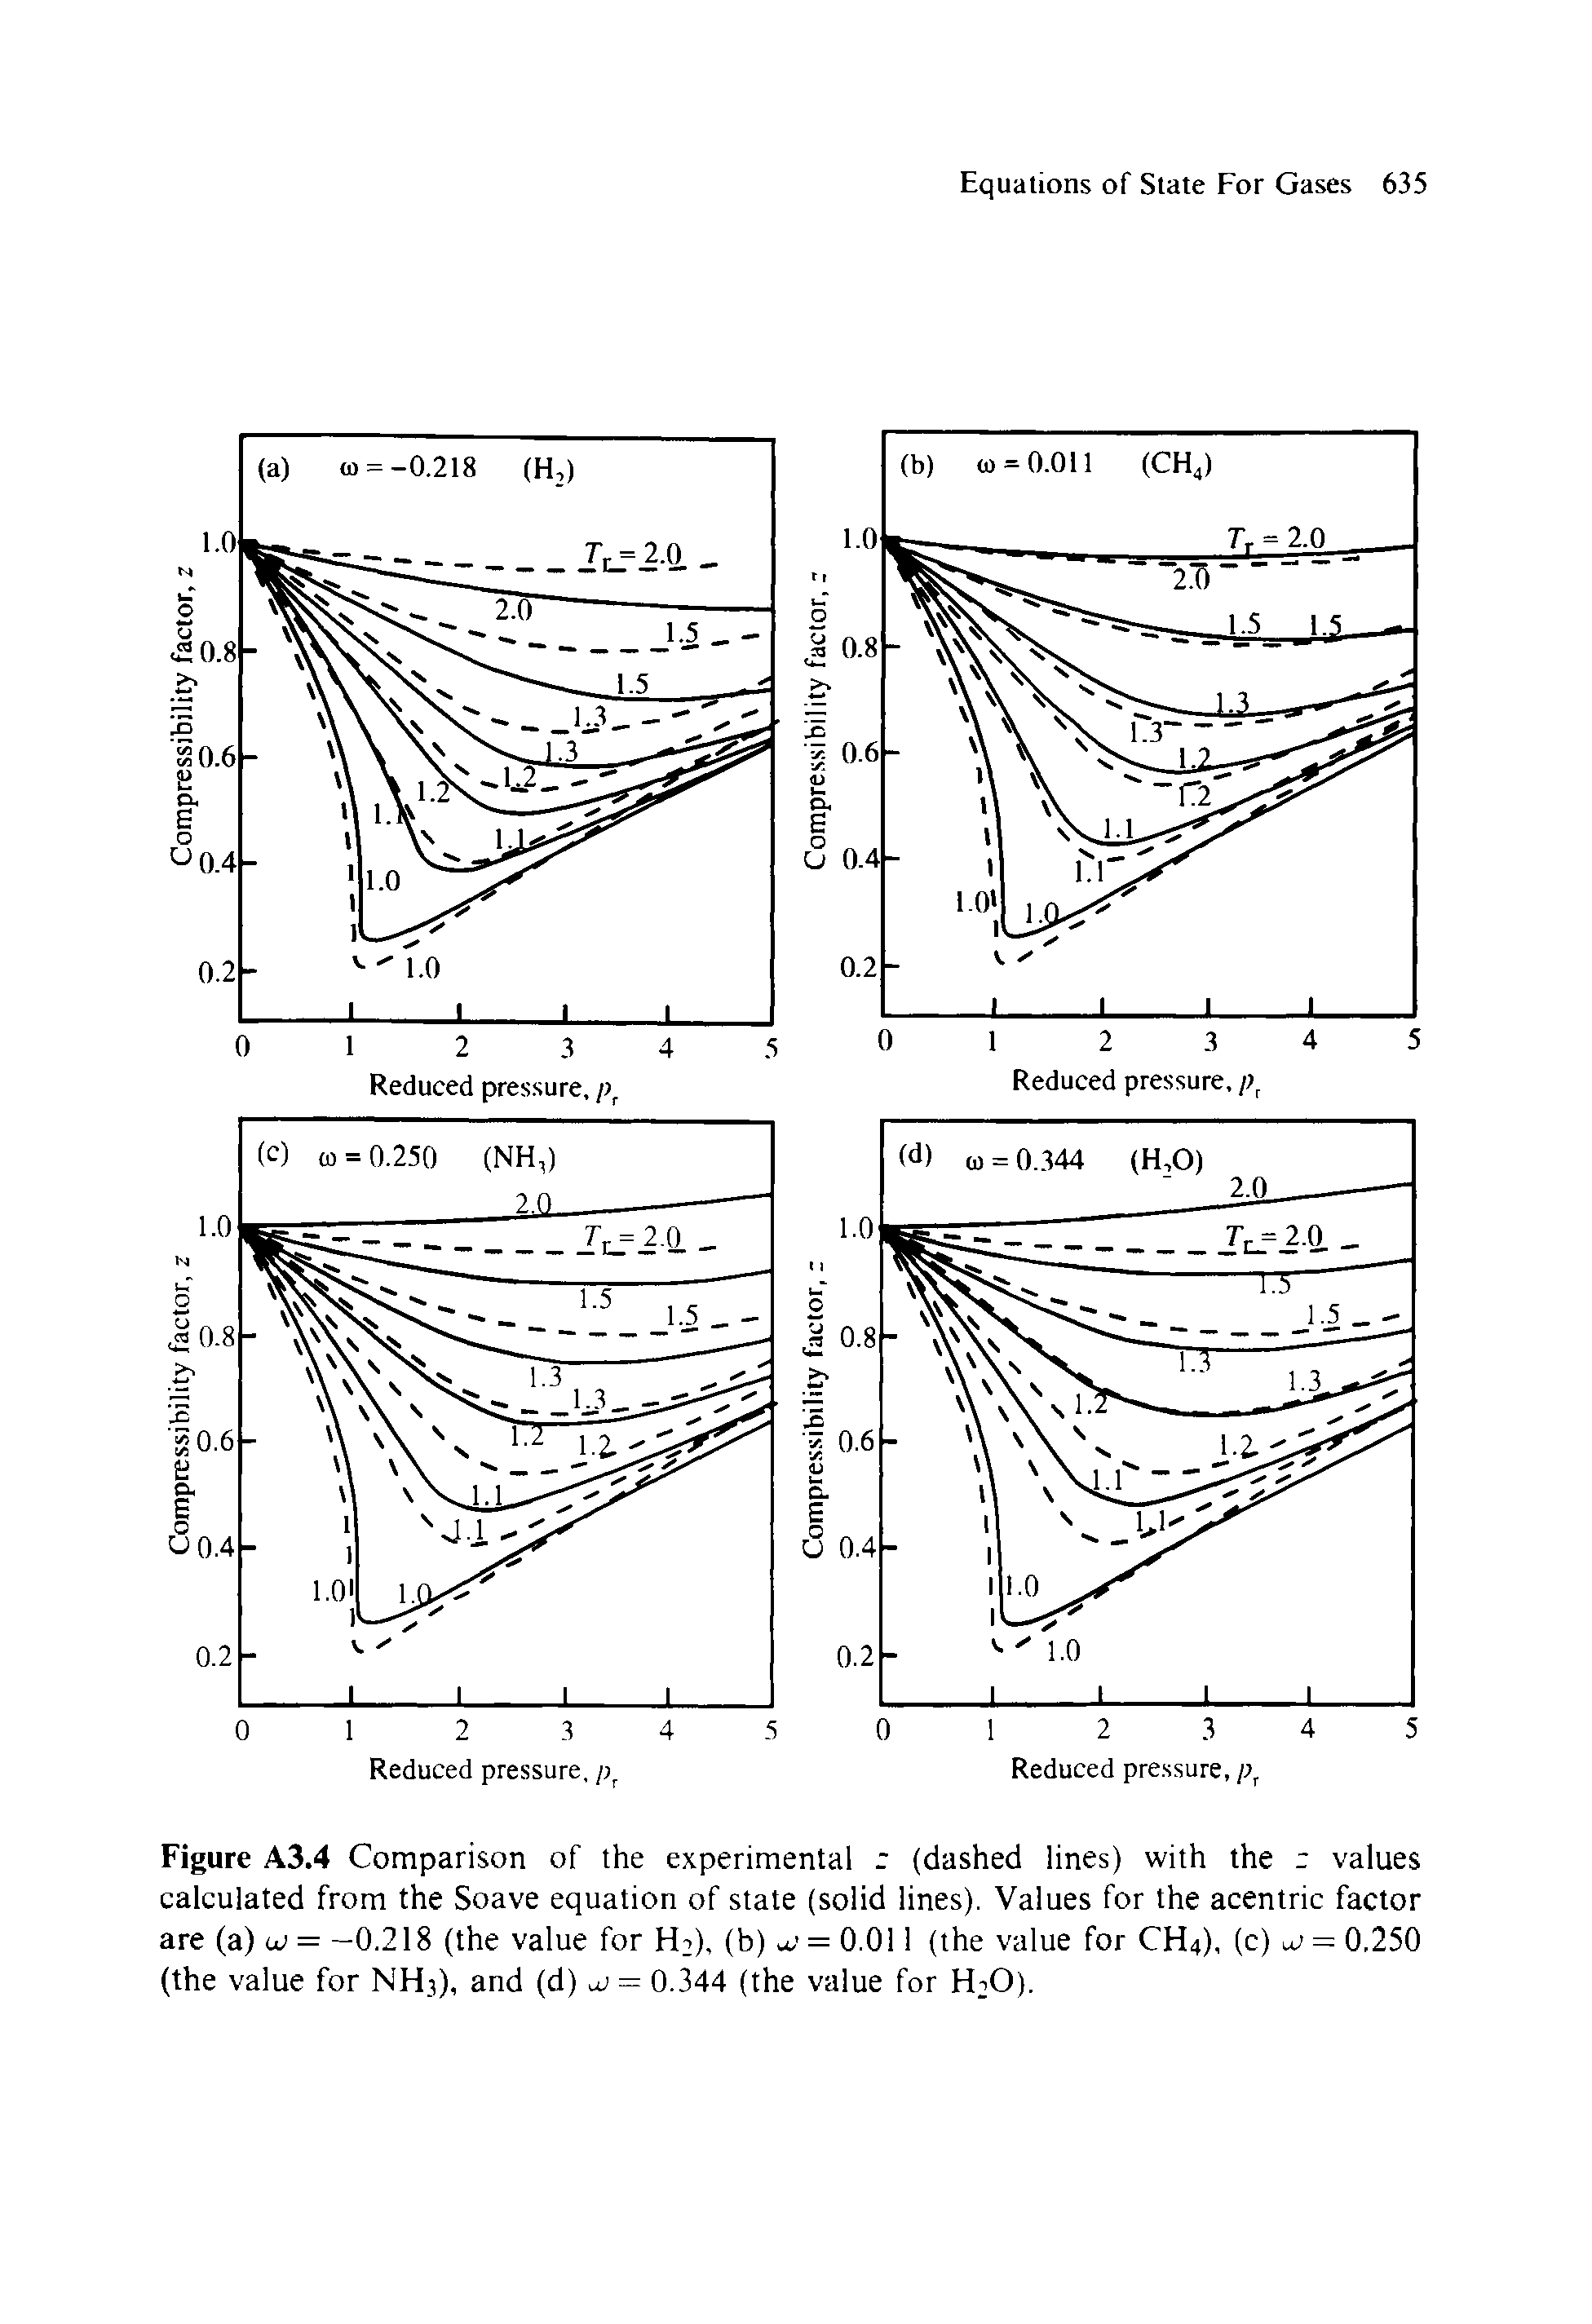 Figure A3.4 Comparison of the experimental r (dashed lines) with the r values calculated from the Soave equation of state (solid lines). Values for the acentric factor are (a) oj = -0.218 (the value for EC), (b) a, = 0.011 (the value for CH4), (c) lU = 0,250 (the value for NEC), and (d) = 0.344 (the value for ECO).